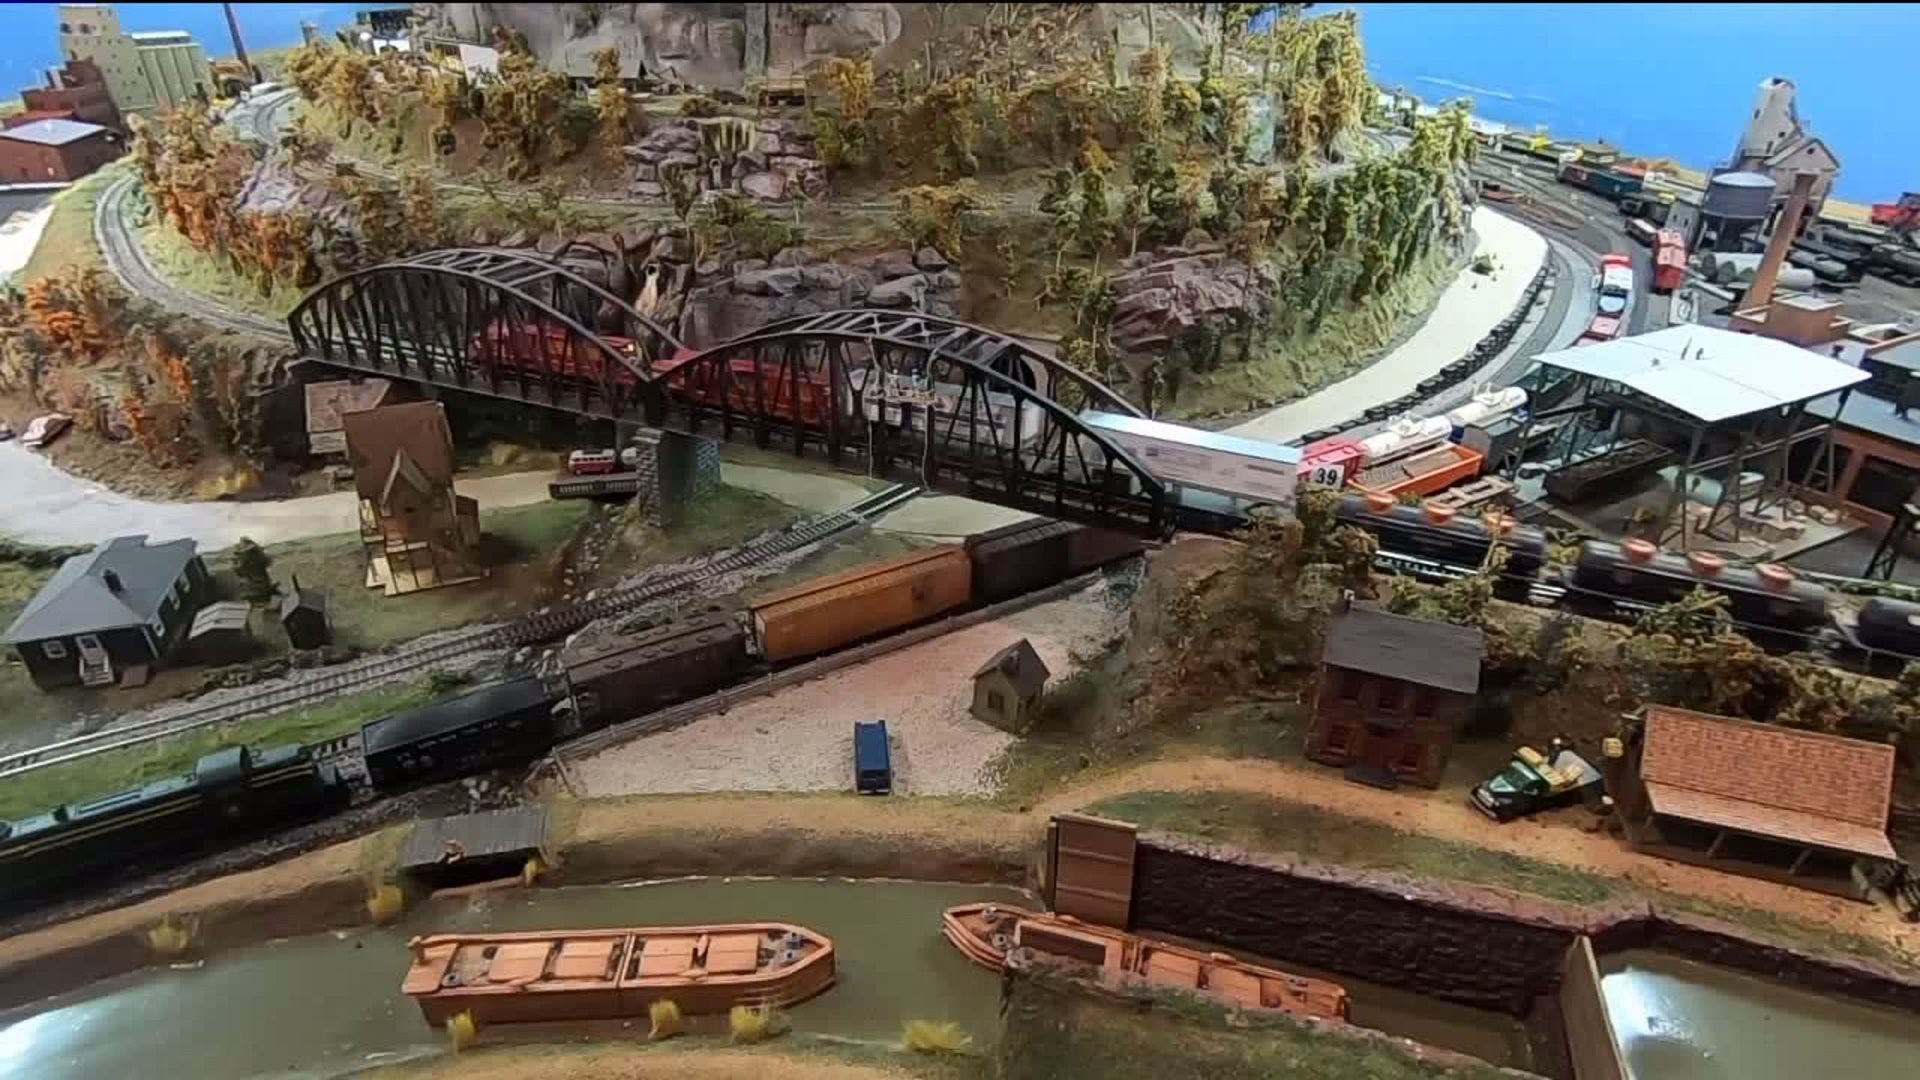 Unique Home for Model Trains On The Pennsylvania Road